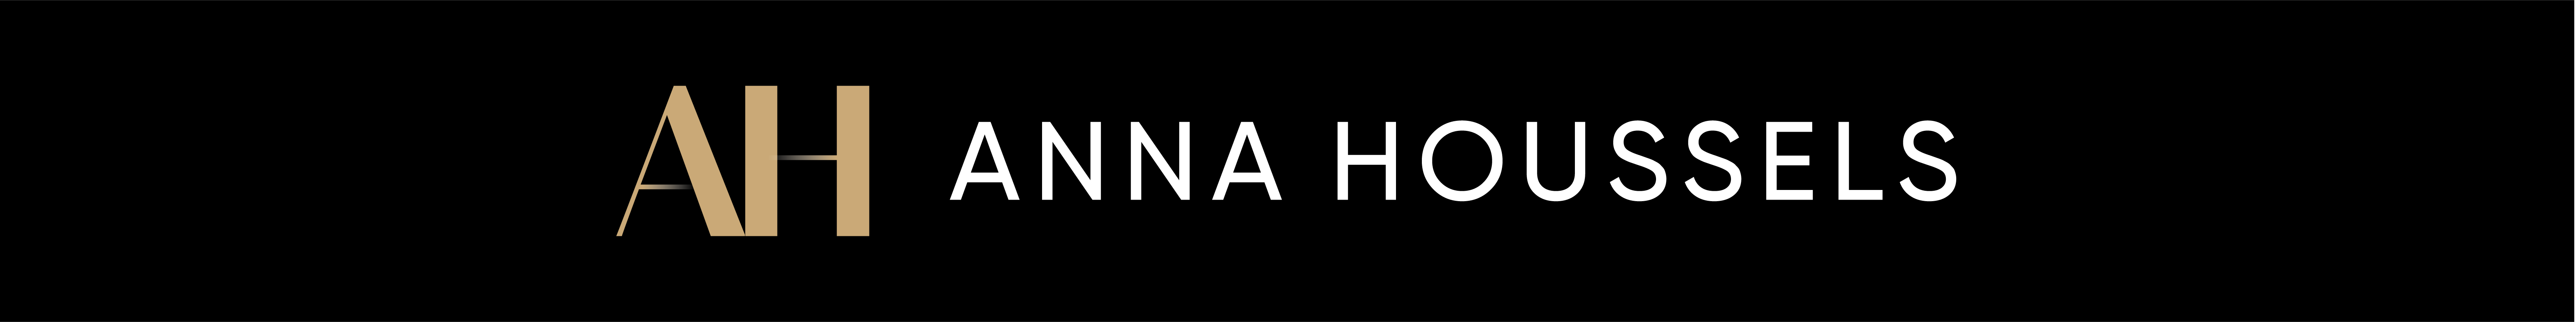 Anna Housels Sydney Waterfront & Luxury Property